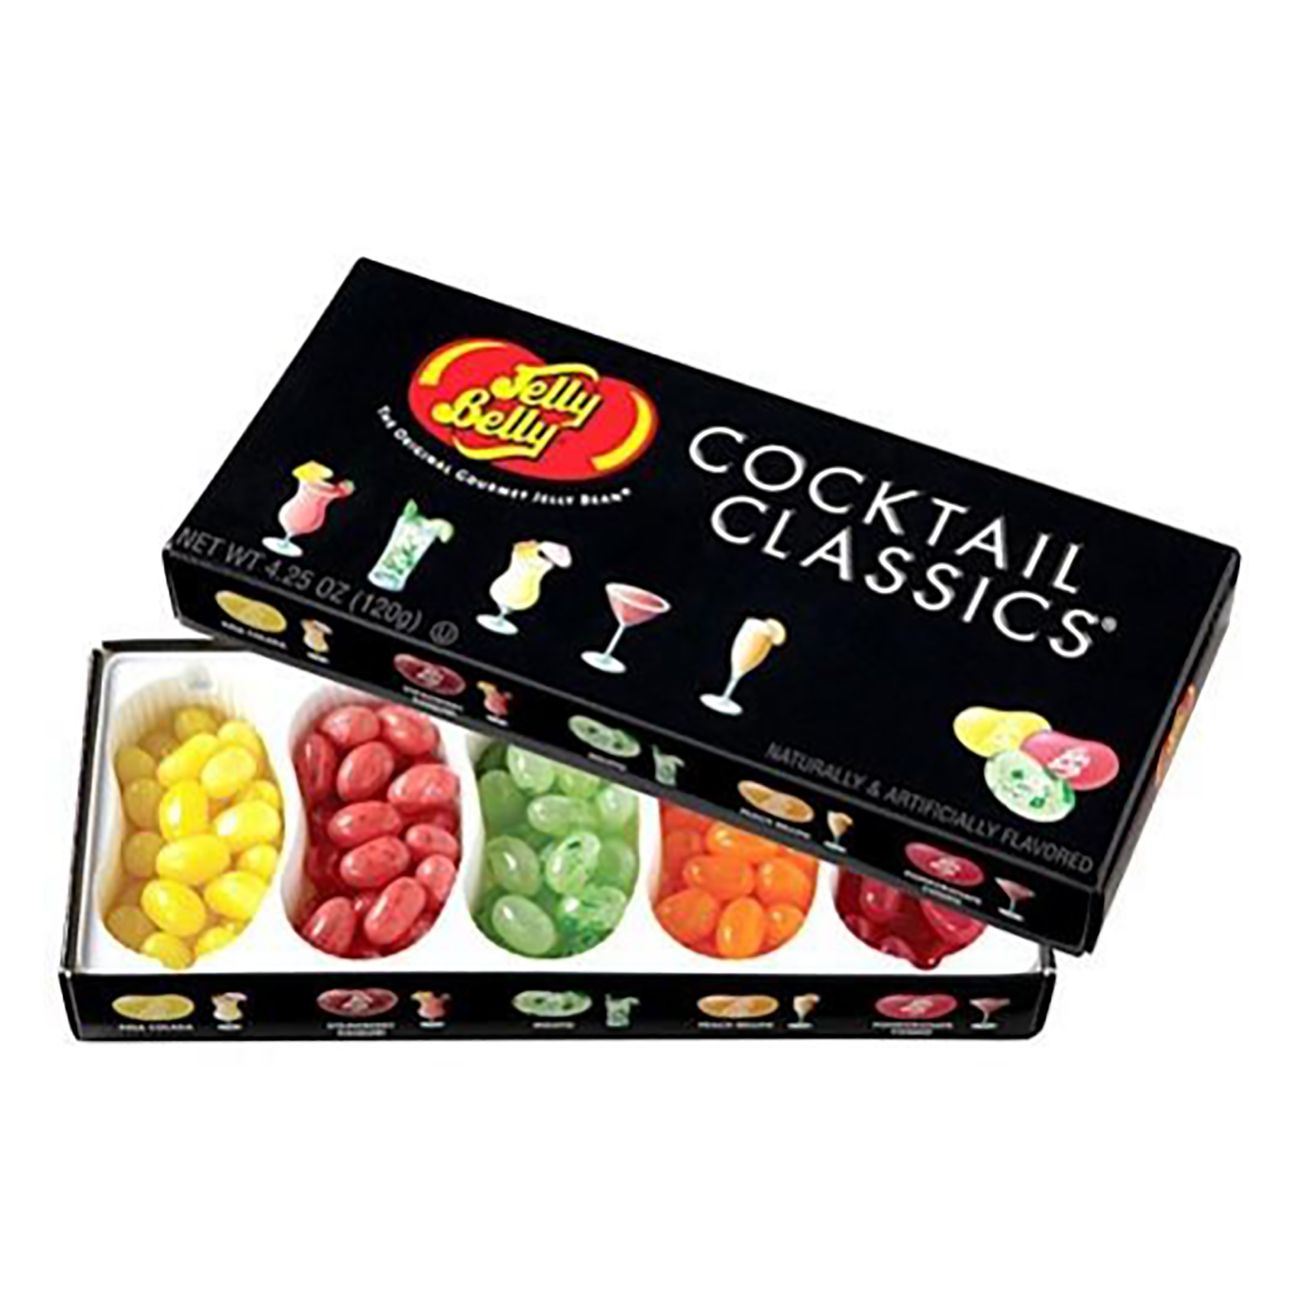 125g-cocktail-classic-gift-box-94484-1